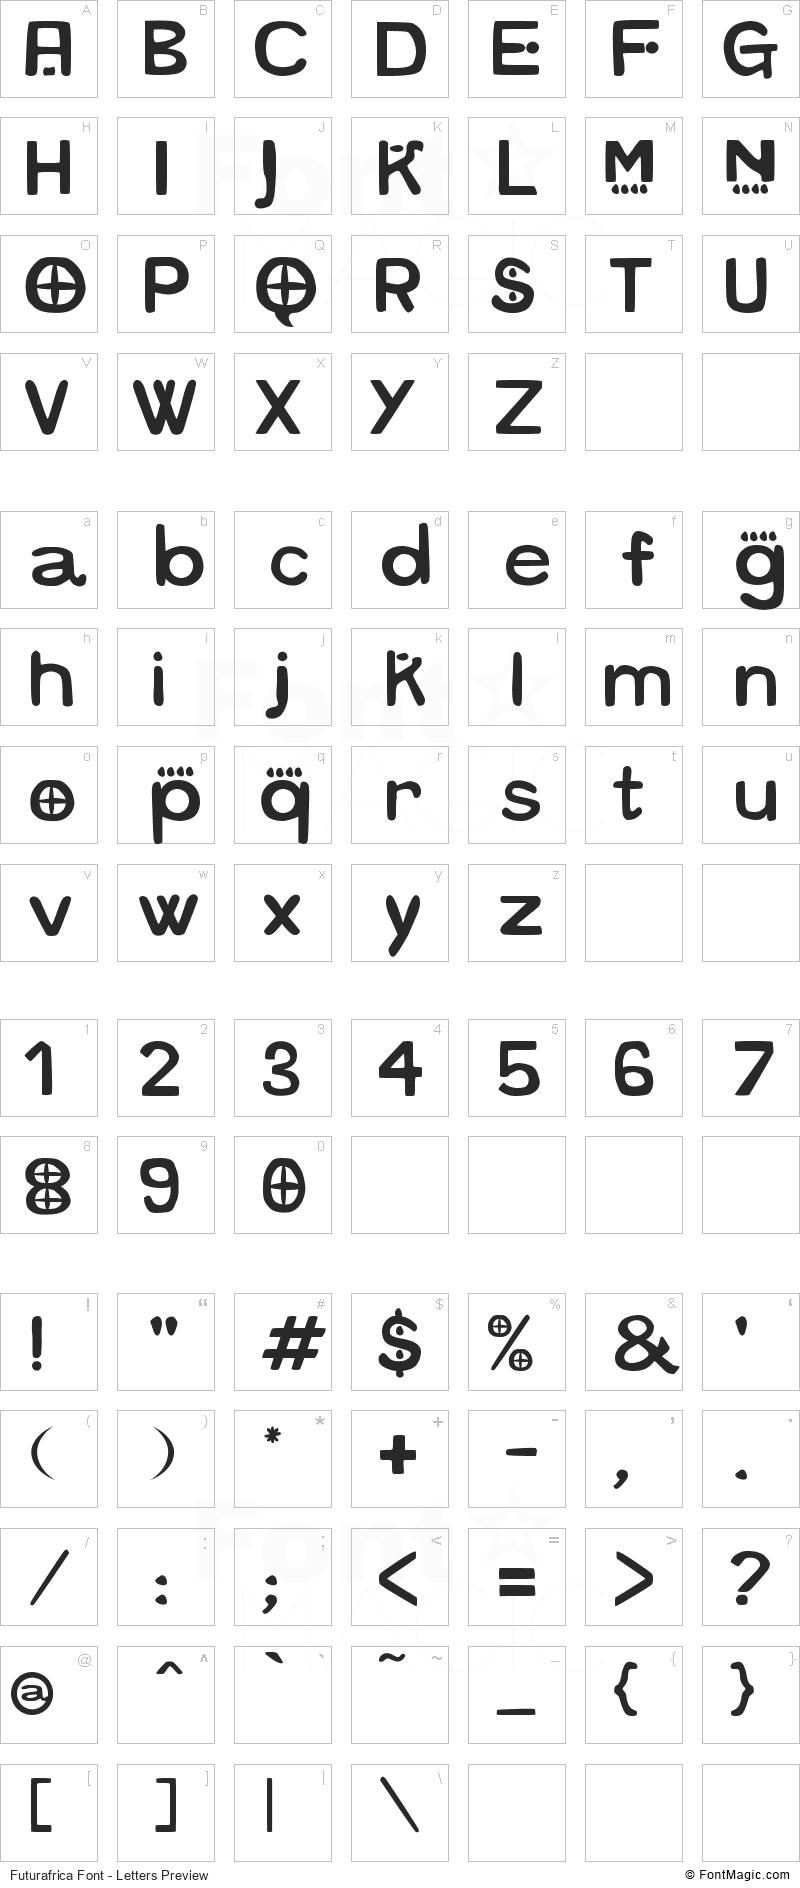 Futurafrica Font - All Latters Preview Chart